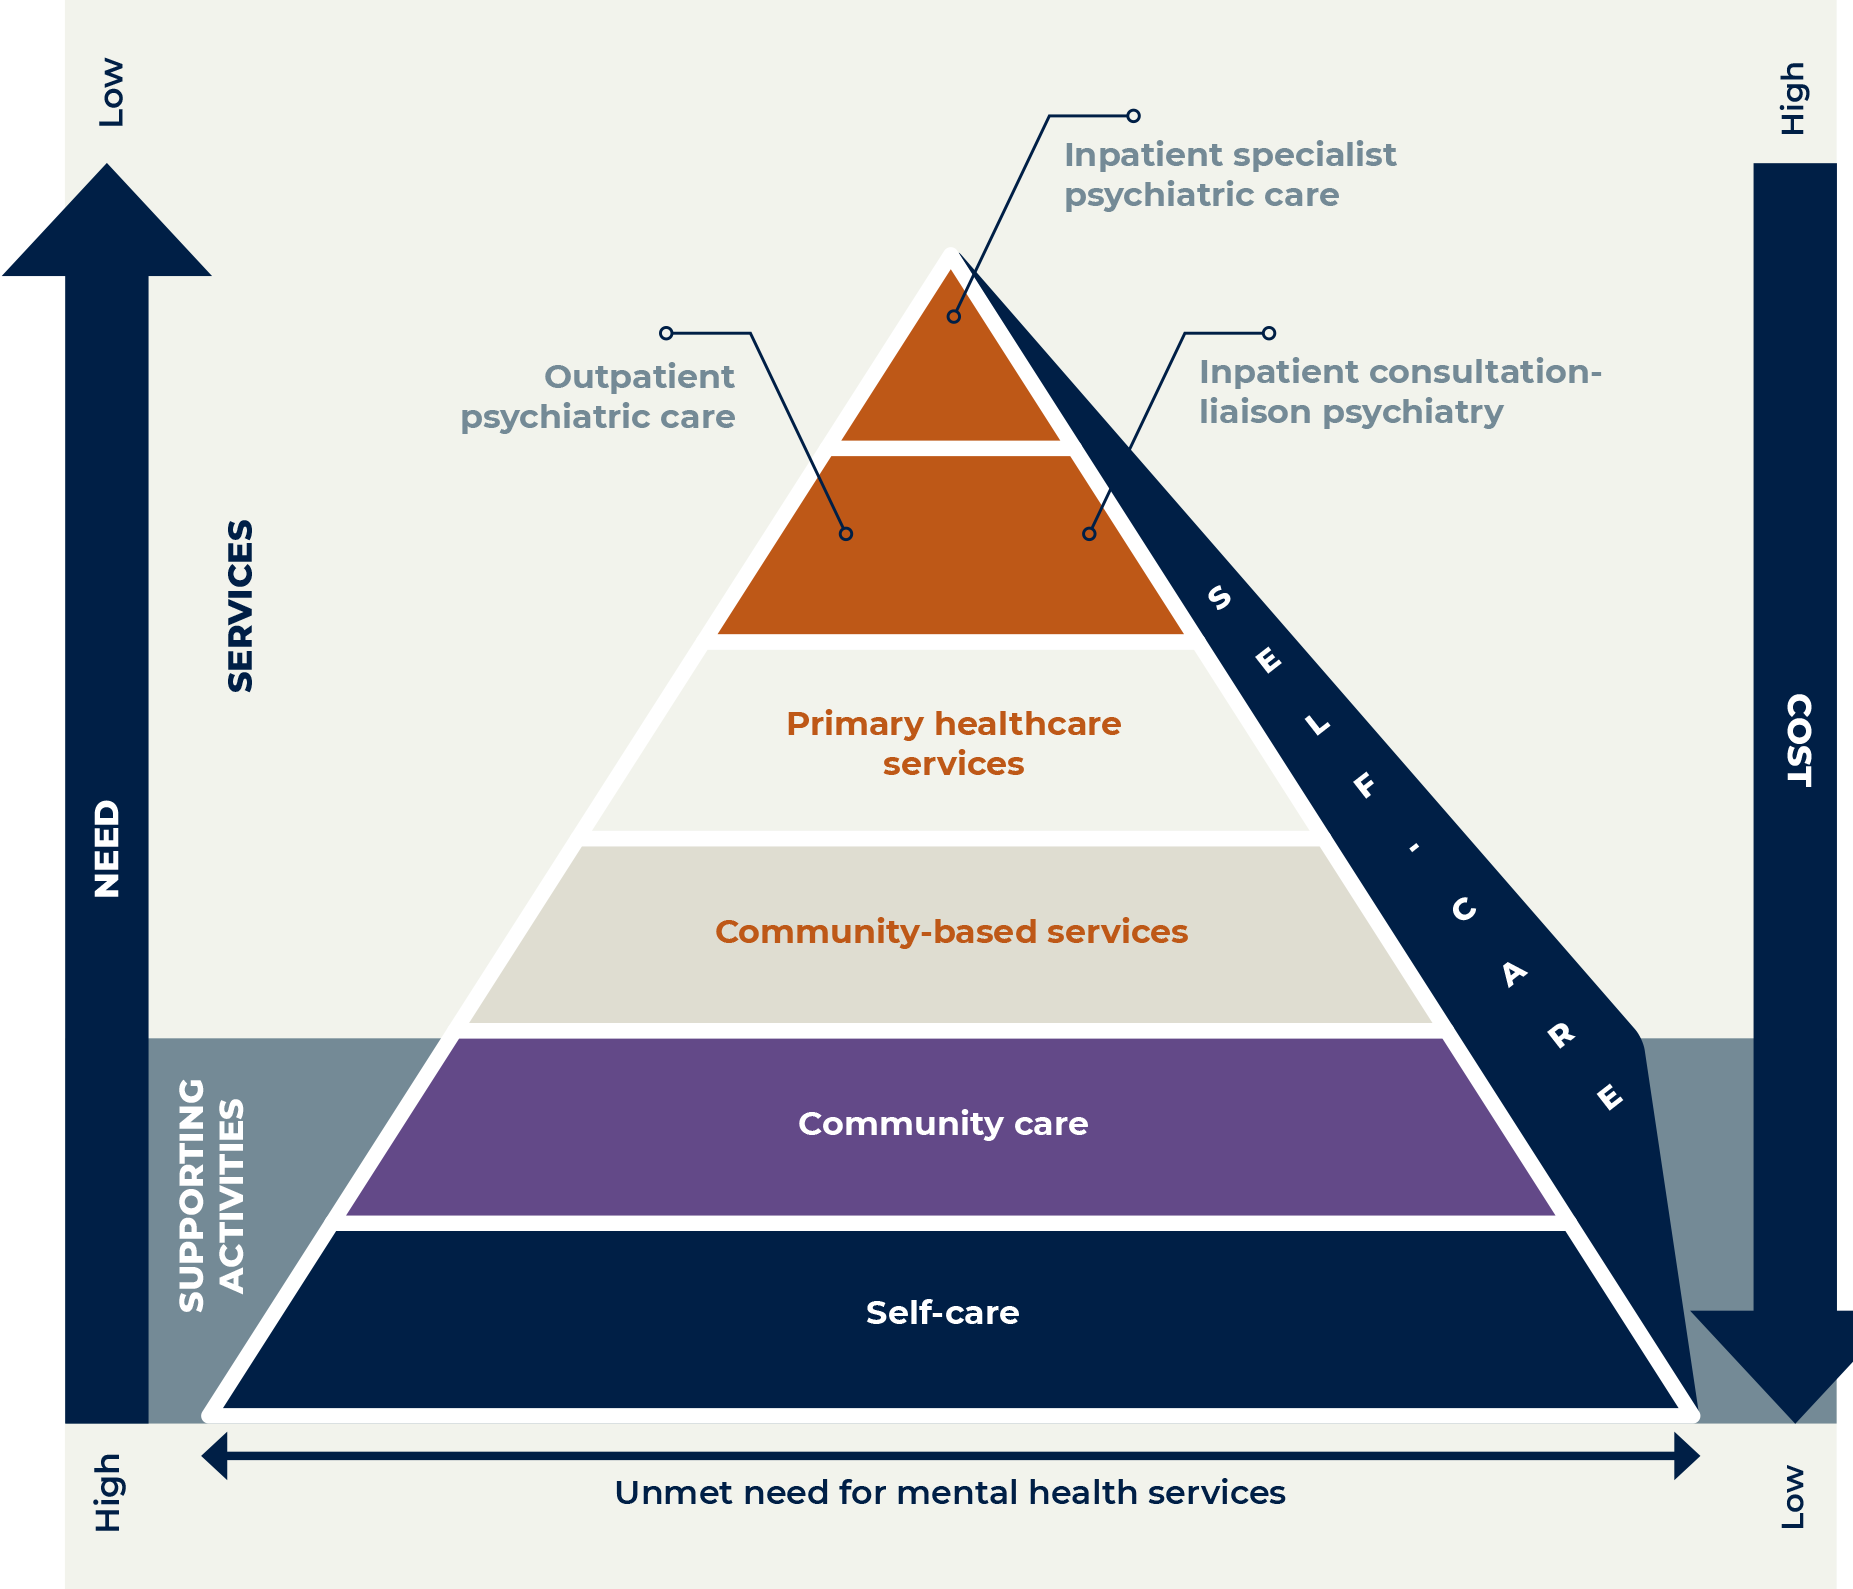 Joonis 1.5.1 - Joonis 1.5.1. Pyramid of mental health services and supporting activities hhh Source: Green Paper on Mental Health (Sotsiaalministeerium 2020a)